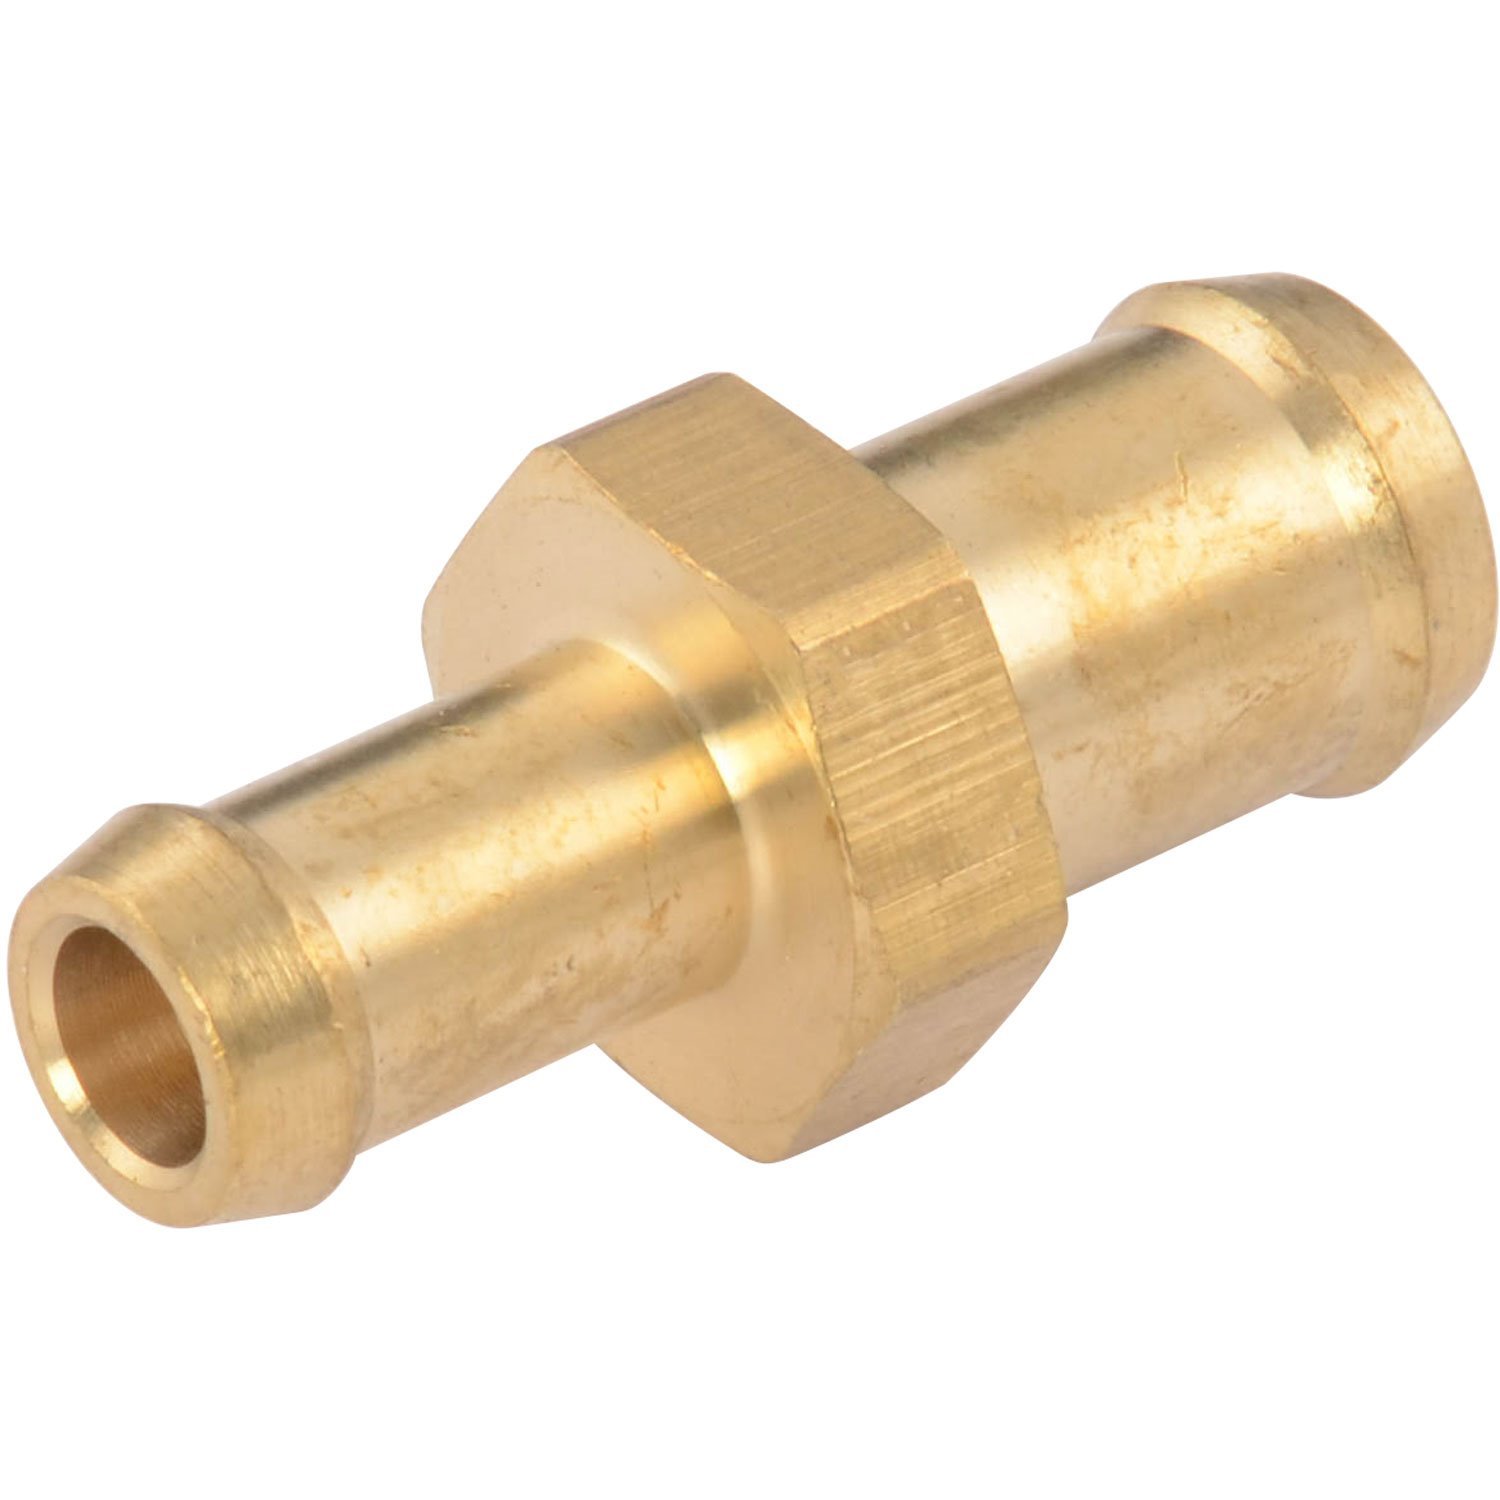 Brass Hose Adapter for 1/2 in. to 3/8 in. Hose